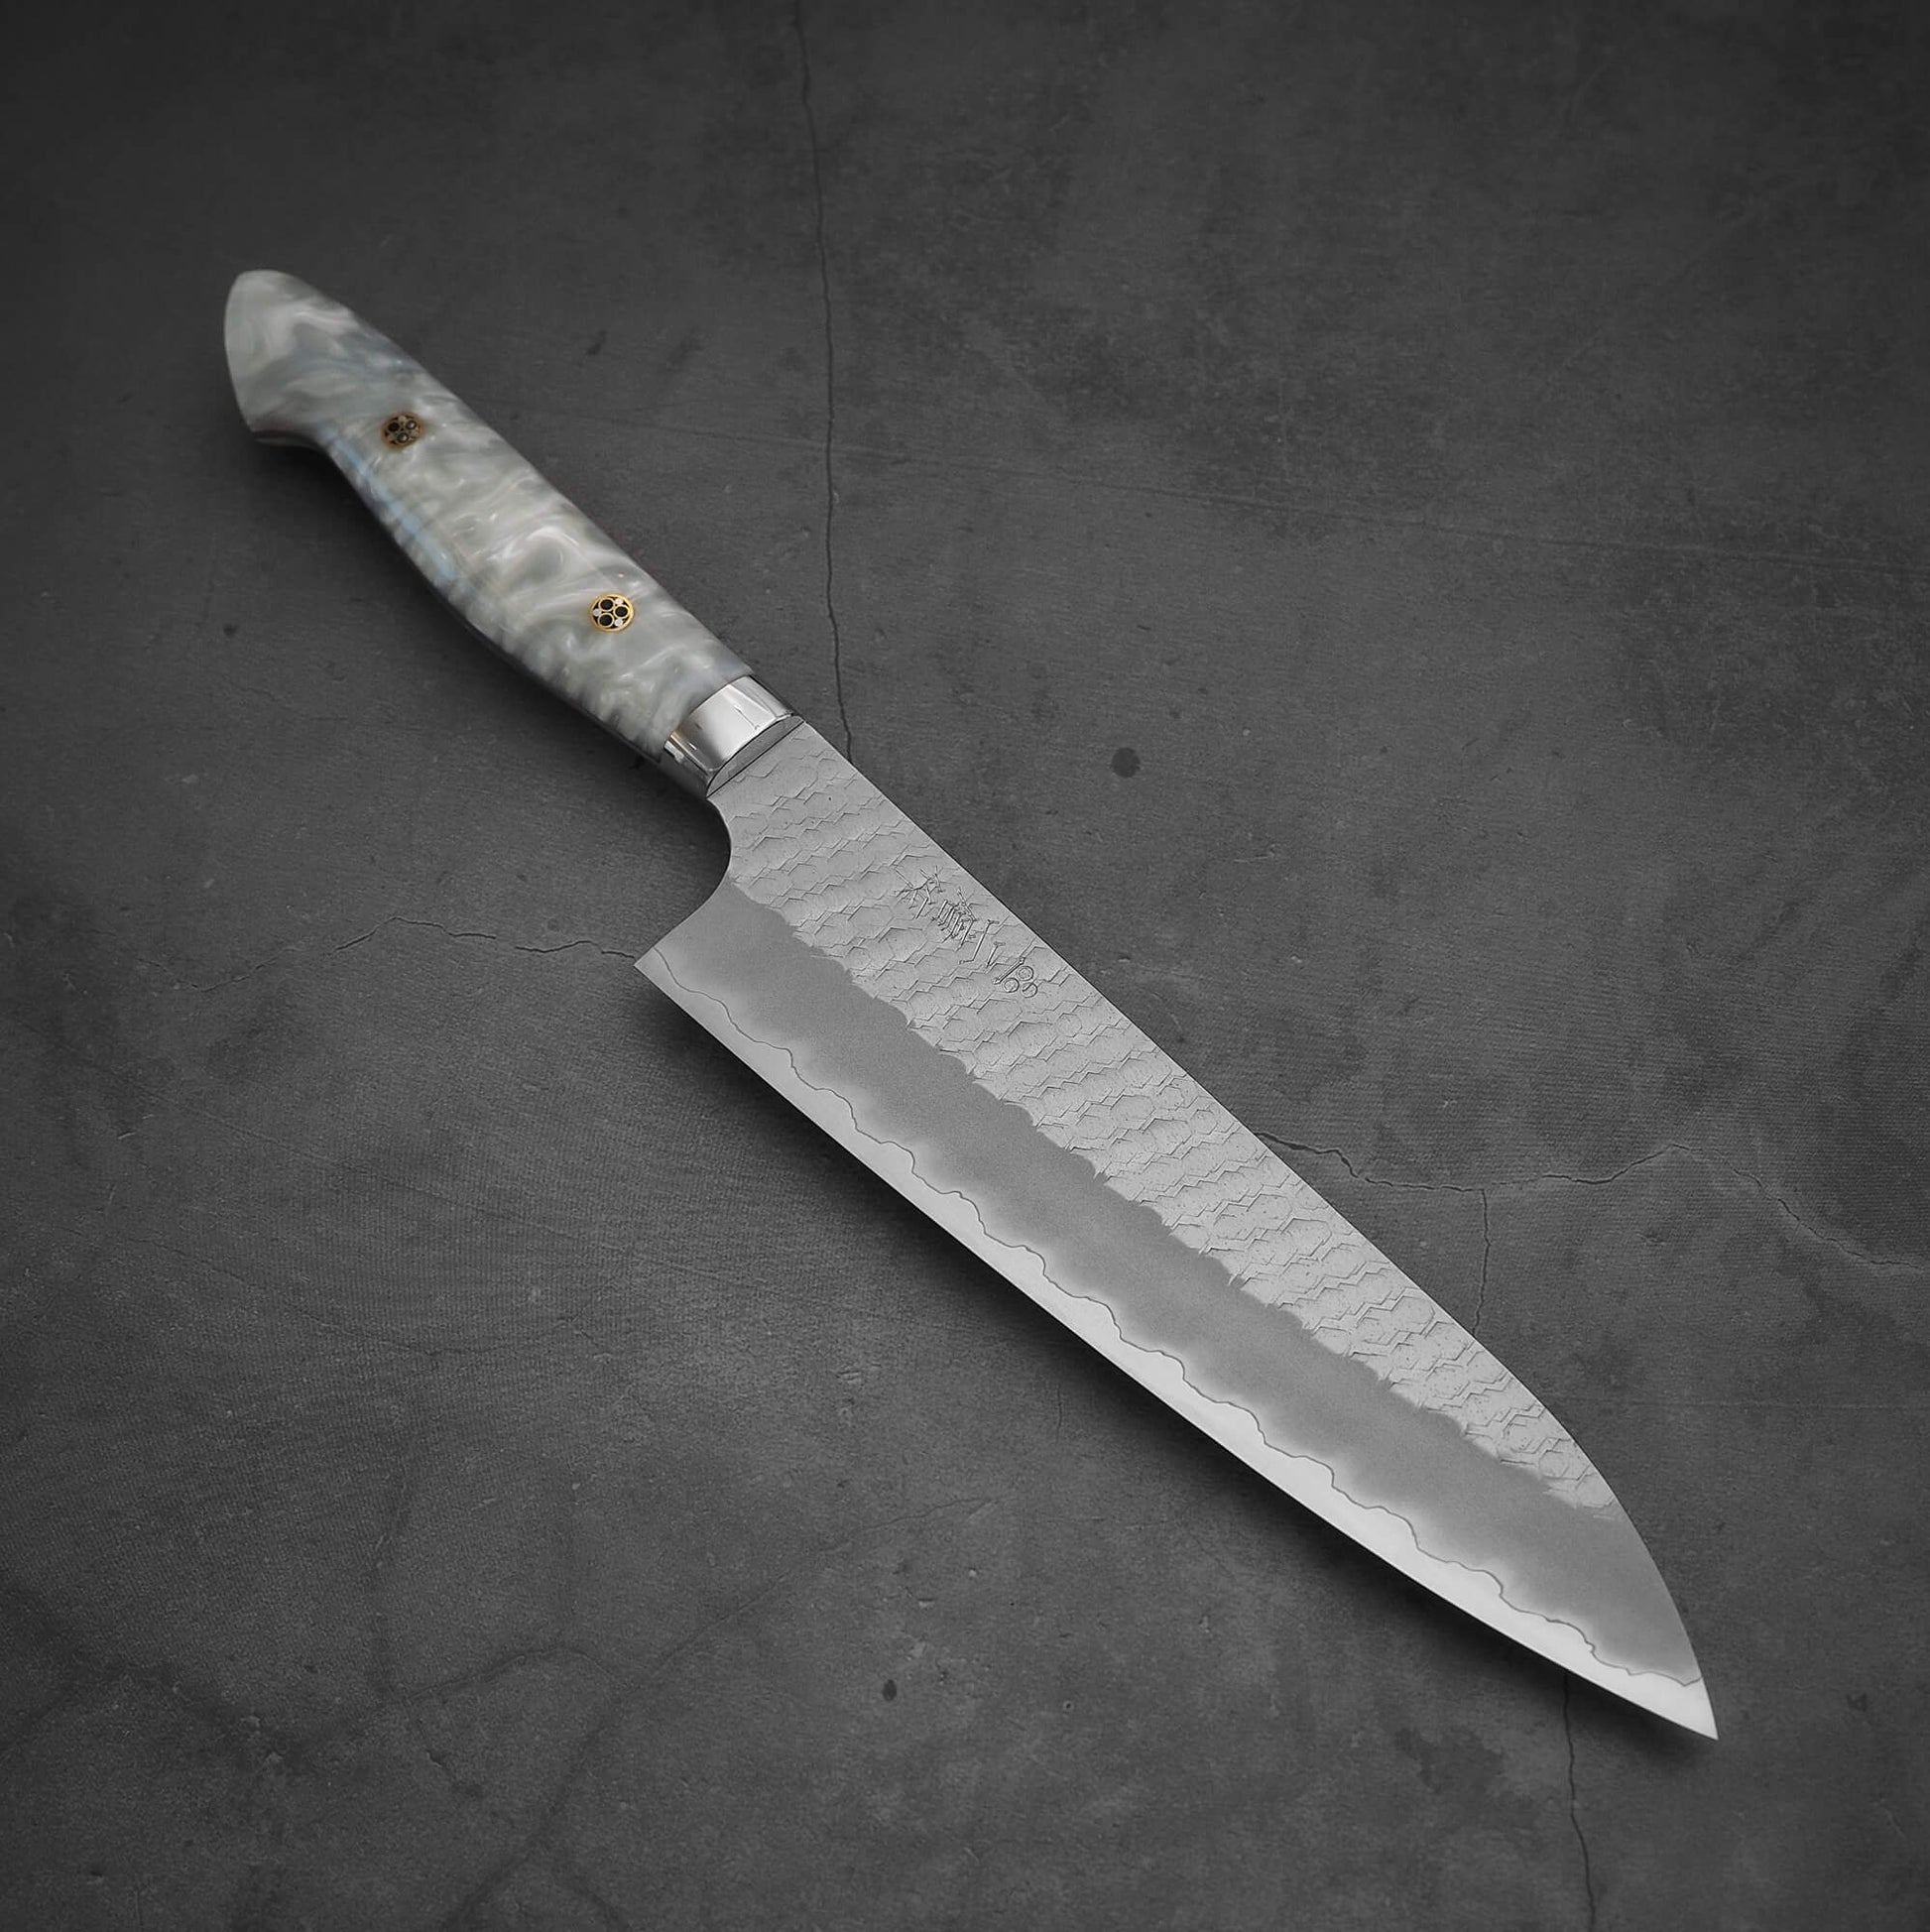 Top view of 210mm Nigara tsuchime SG2 gyuto knife with pearl handle resin in diagonal position where tip is pointing on bottom right